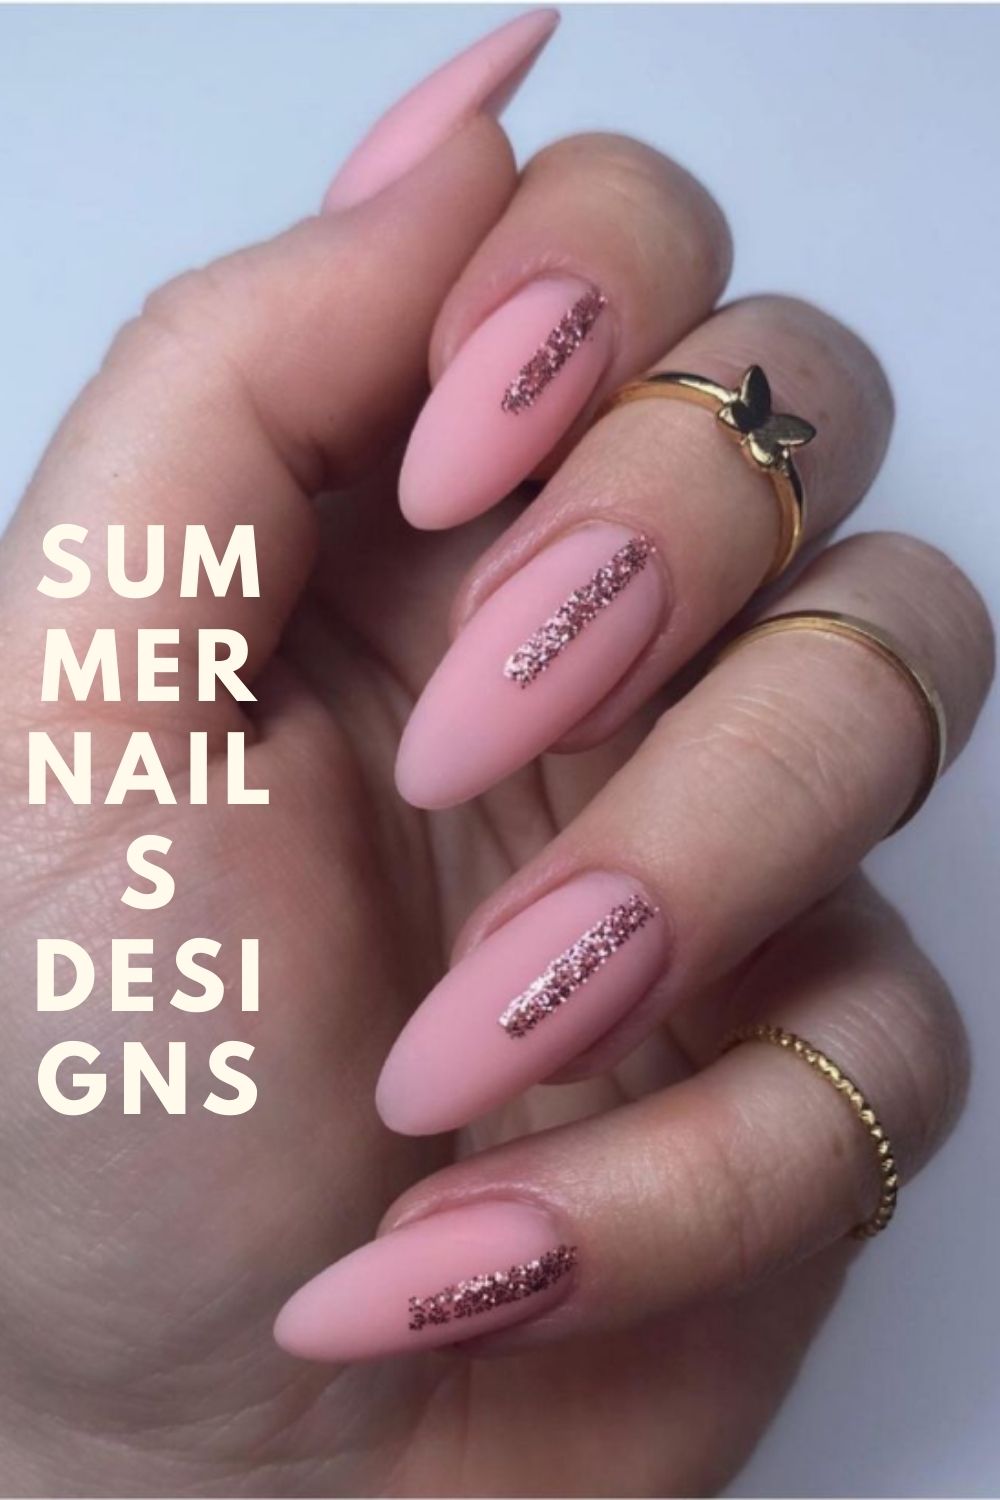 Glitter and pink almond nails designs